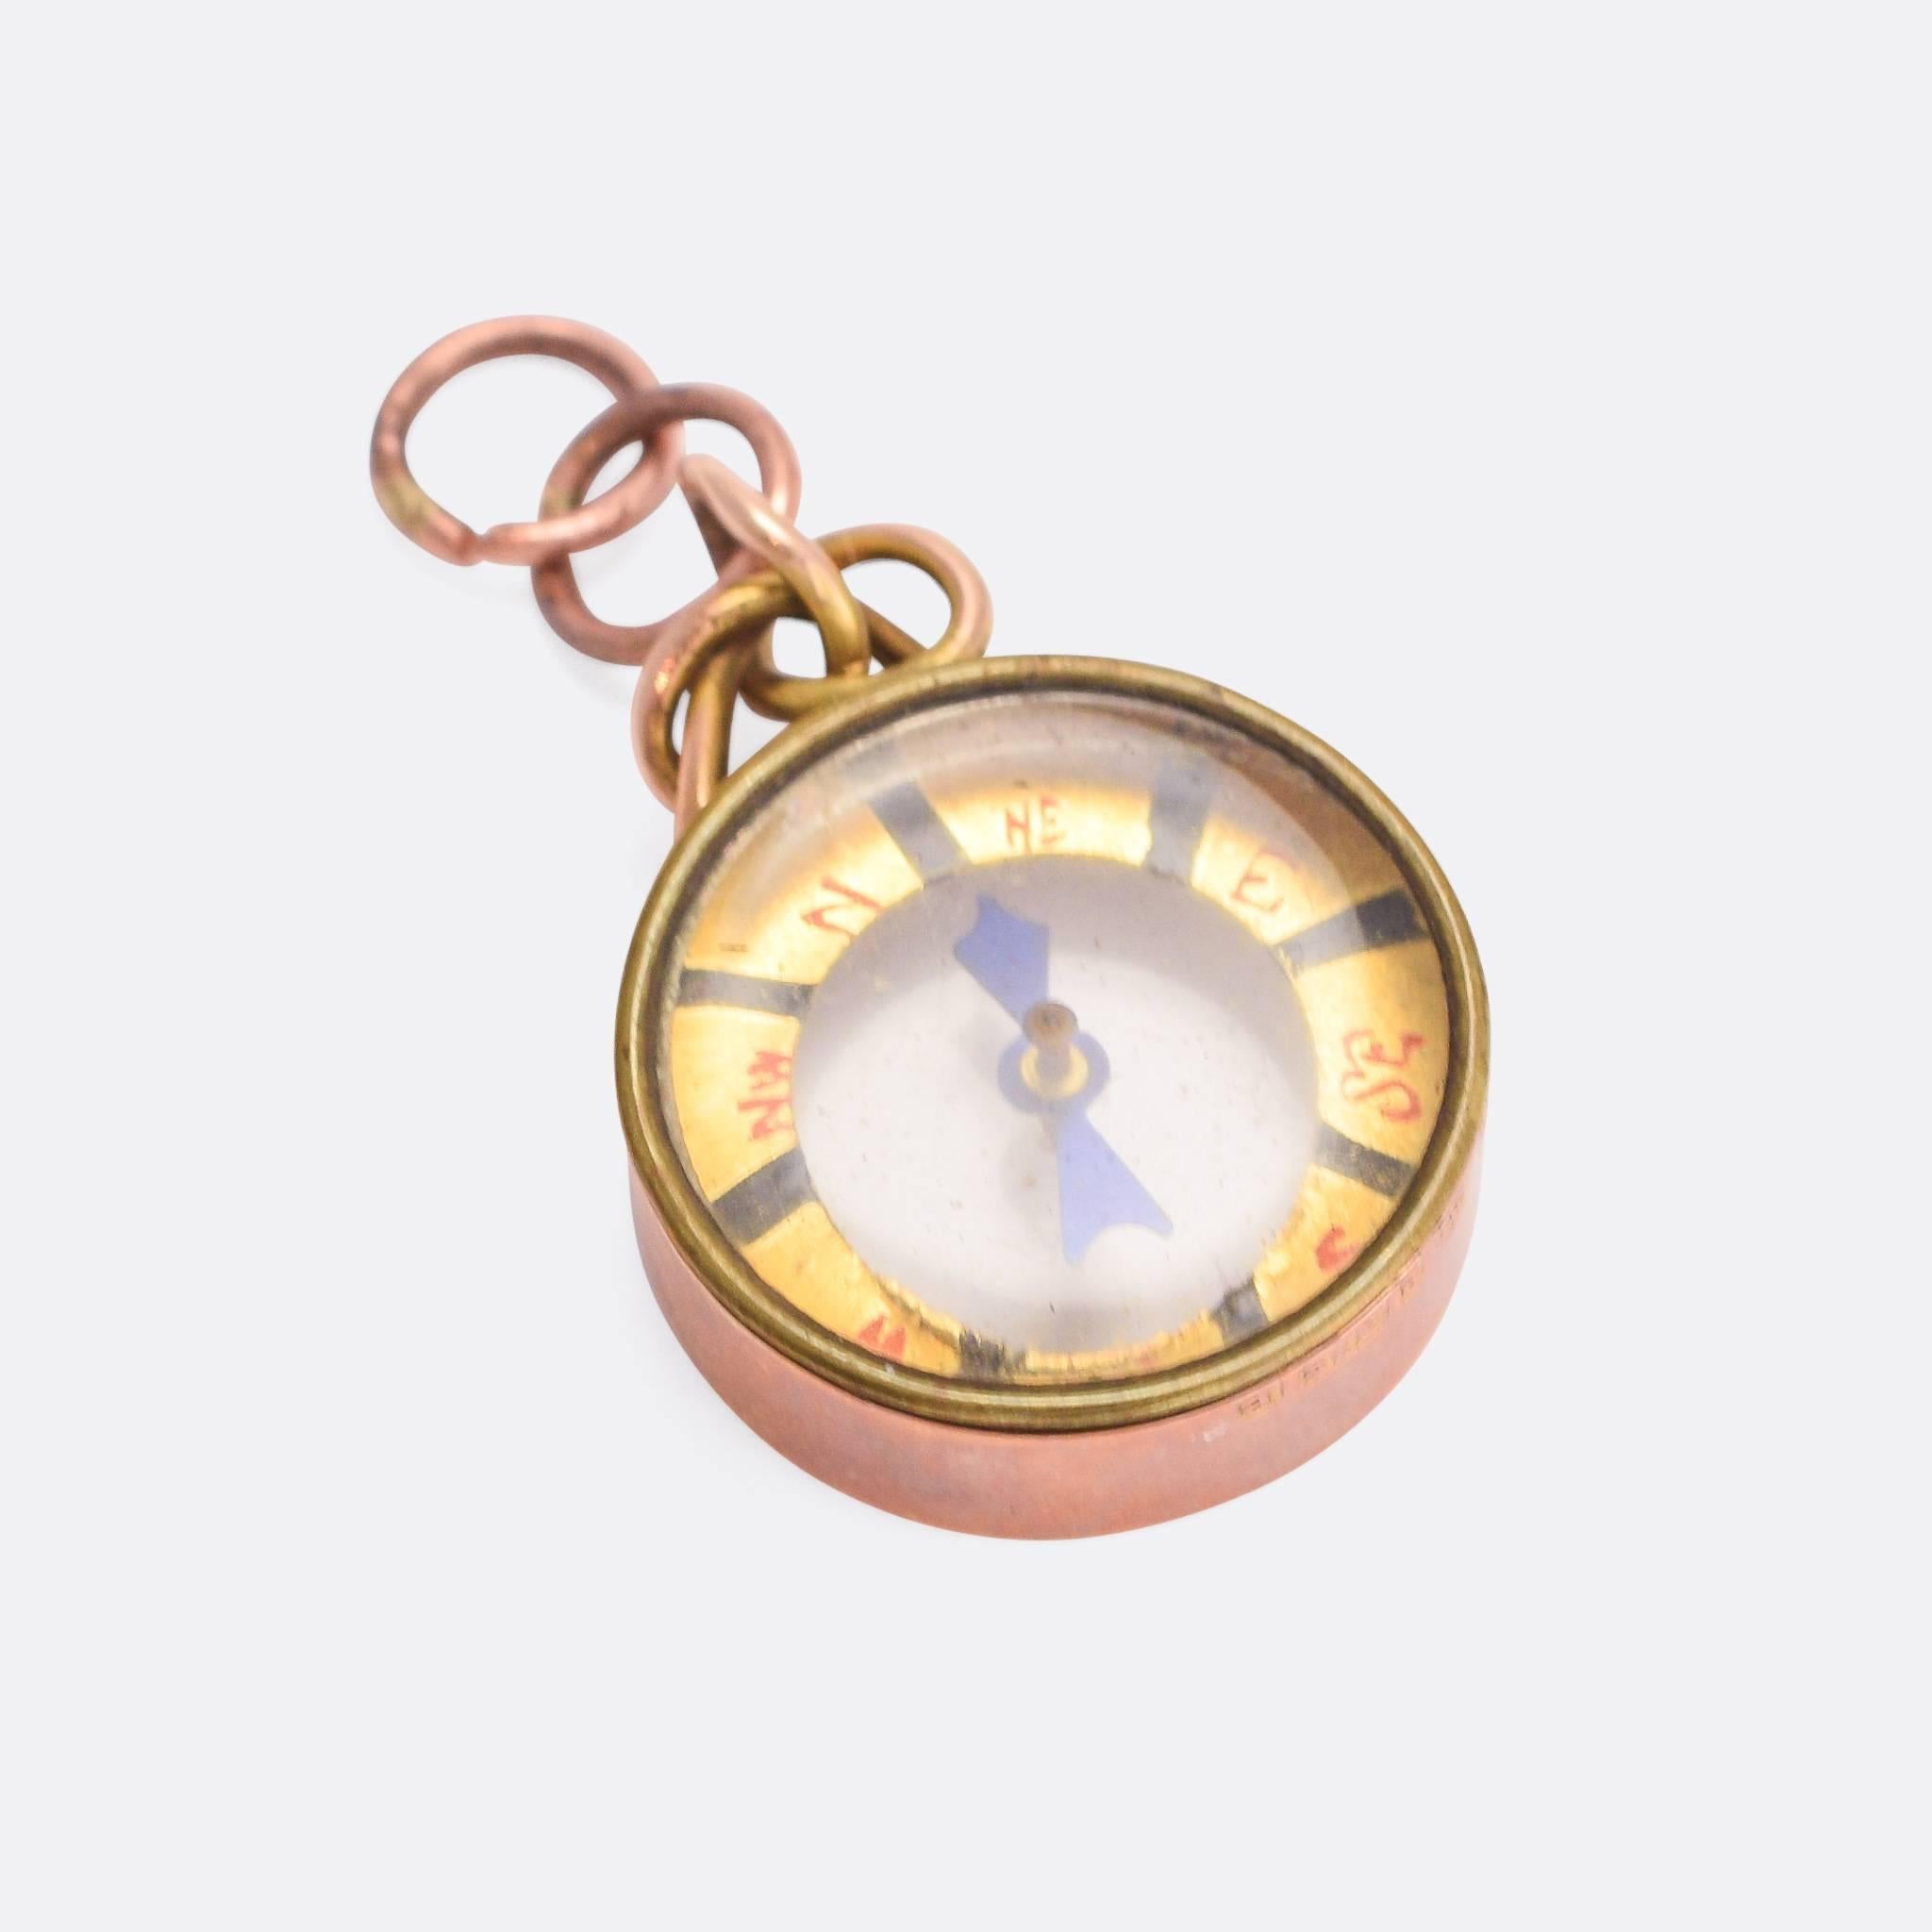 A fine antique compass pendant modelled in 9 karat rose gold. With original glass and fittings, with hand painted compass points and detailing. 

MEASUREMENTS 
2.3 x 1.6cm

WEIGHT 
3.4g

MARKS 
English hallmarks for 9k gold, Chester 1898